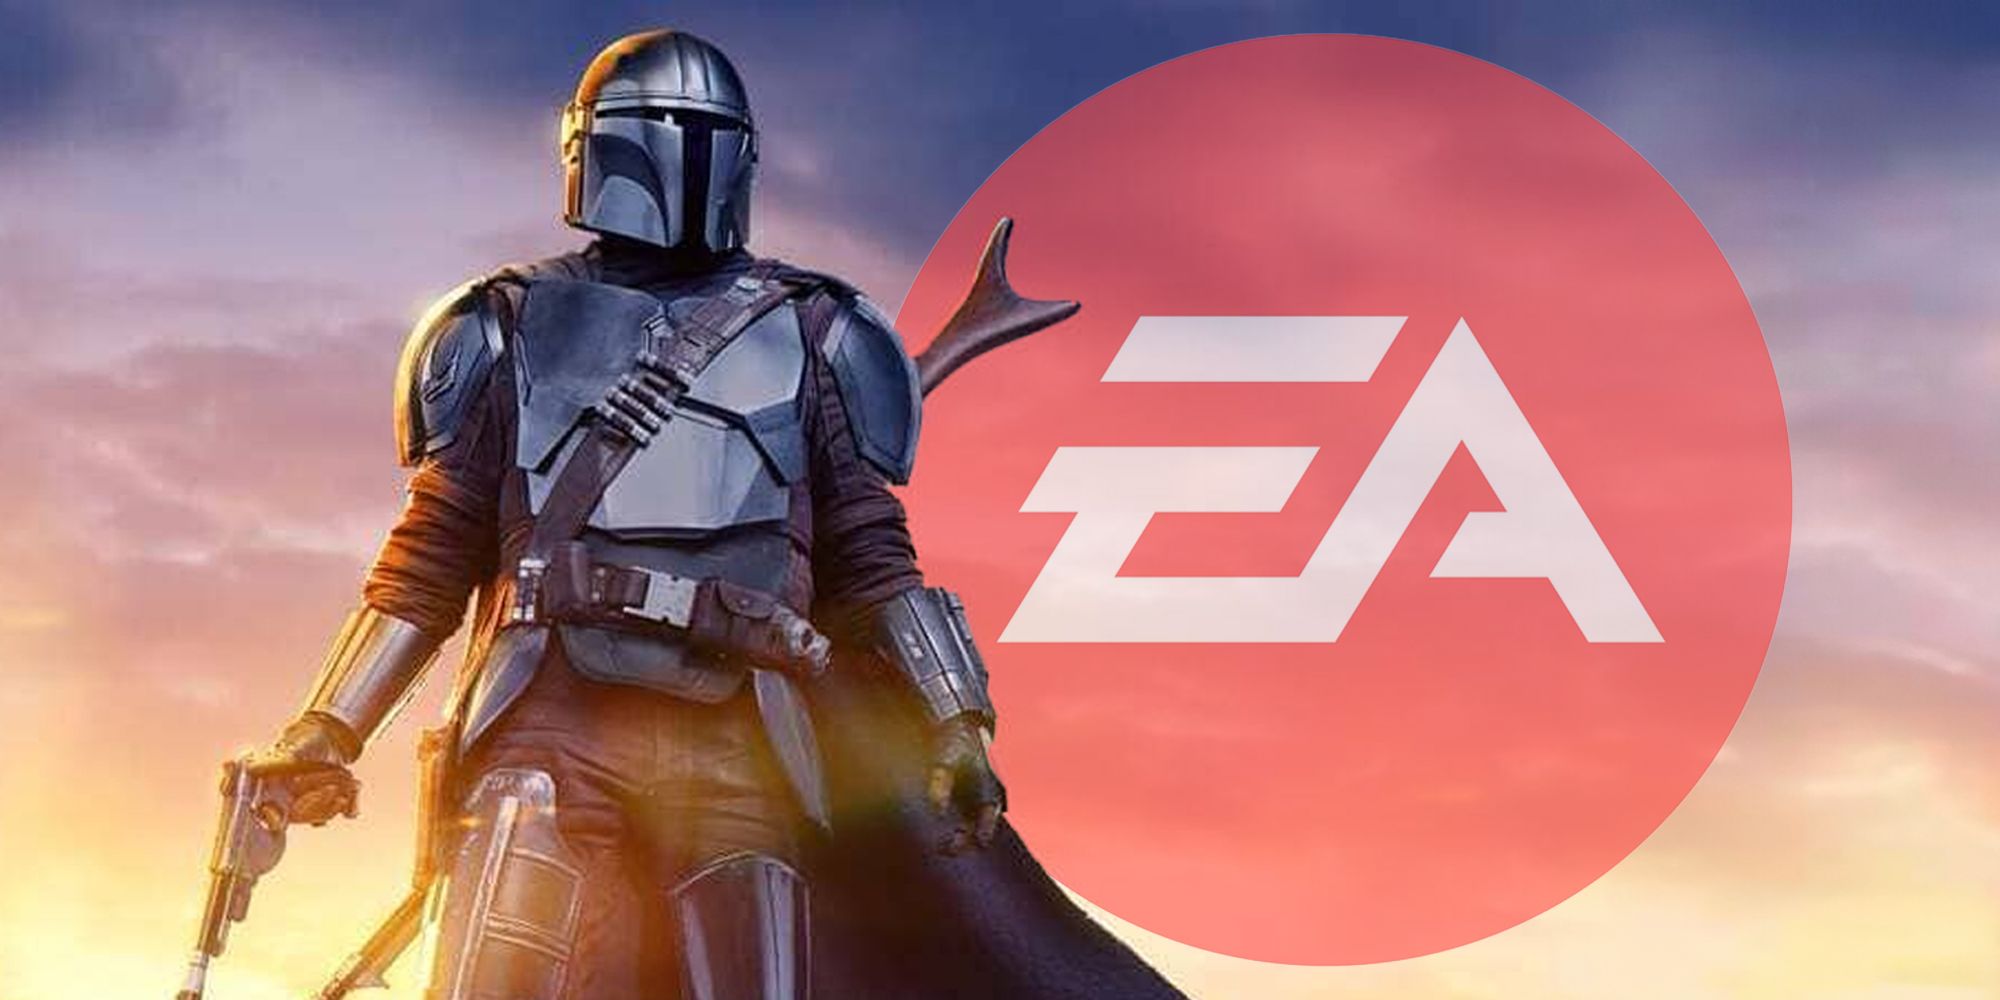 The Mandalorian at sunset with a faded EA logo behind him